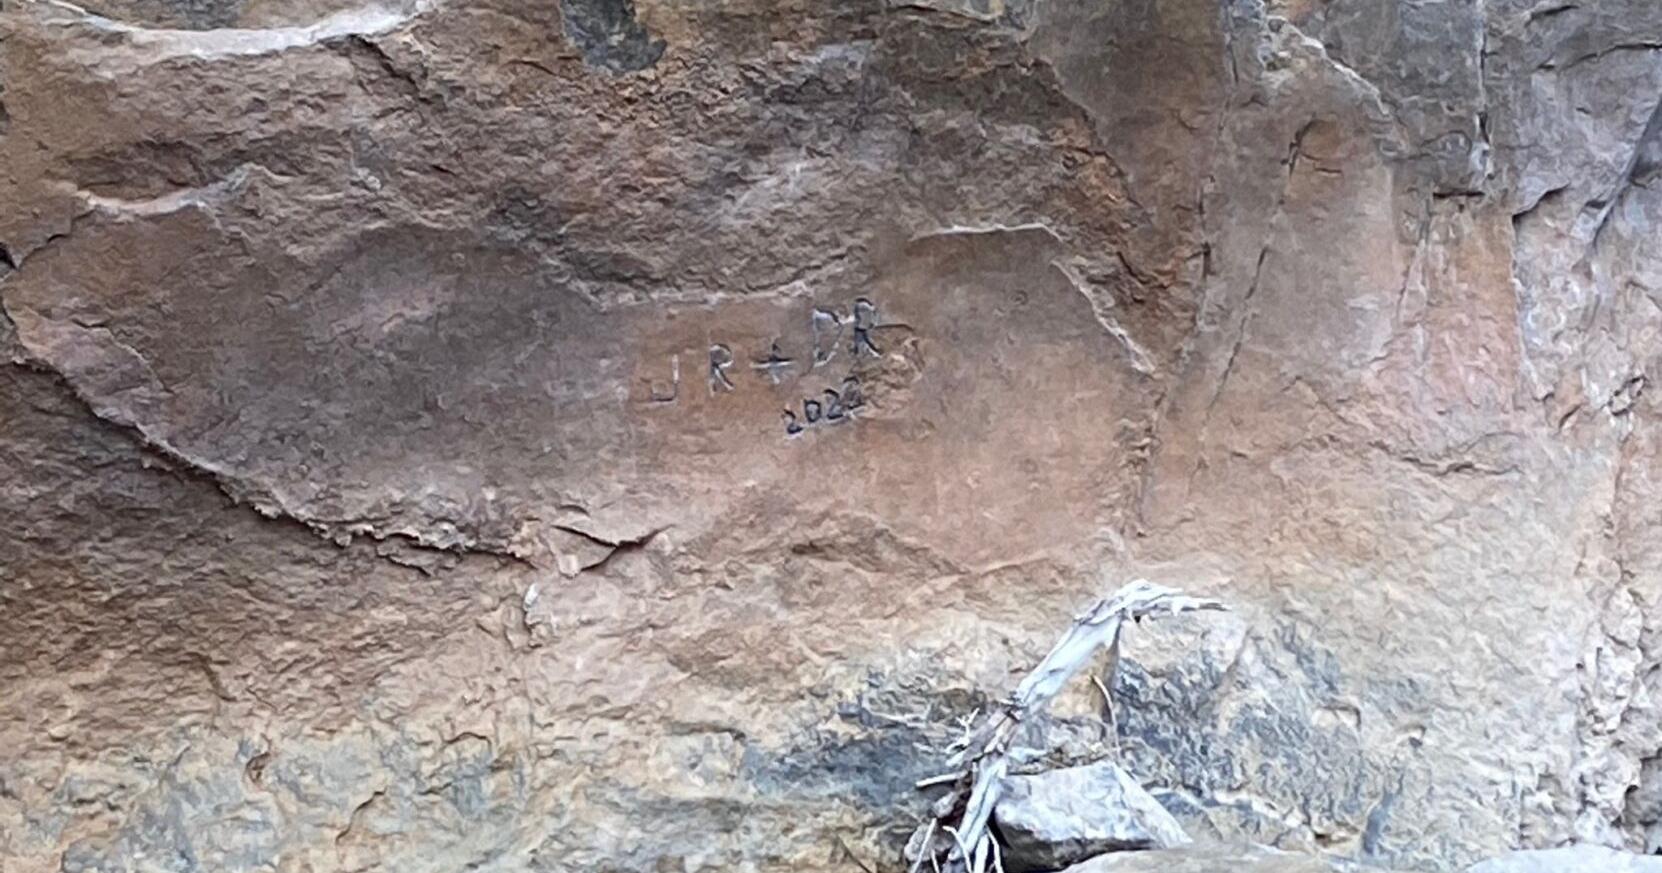 Officials seeking info on vandalism to Hellgate Pictographs